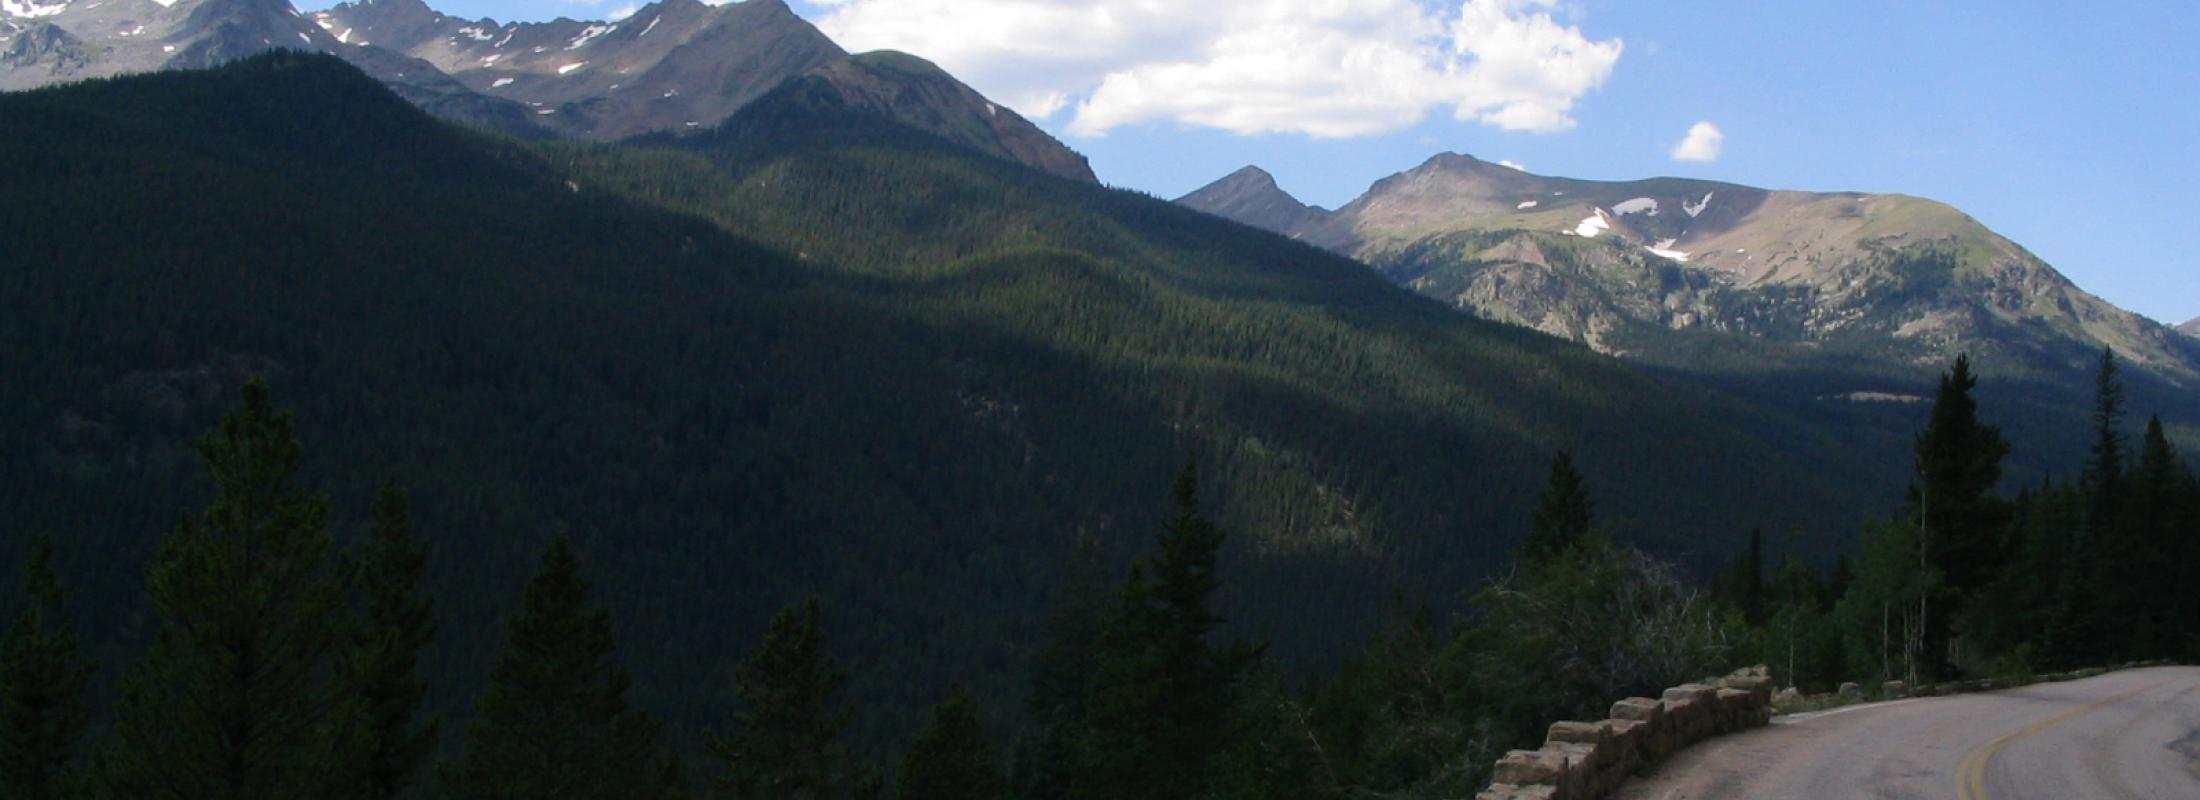 Photo of Rocky Mountain National Park, Colorado taken by Ken Lund, Creative Commons license